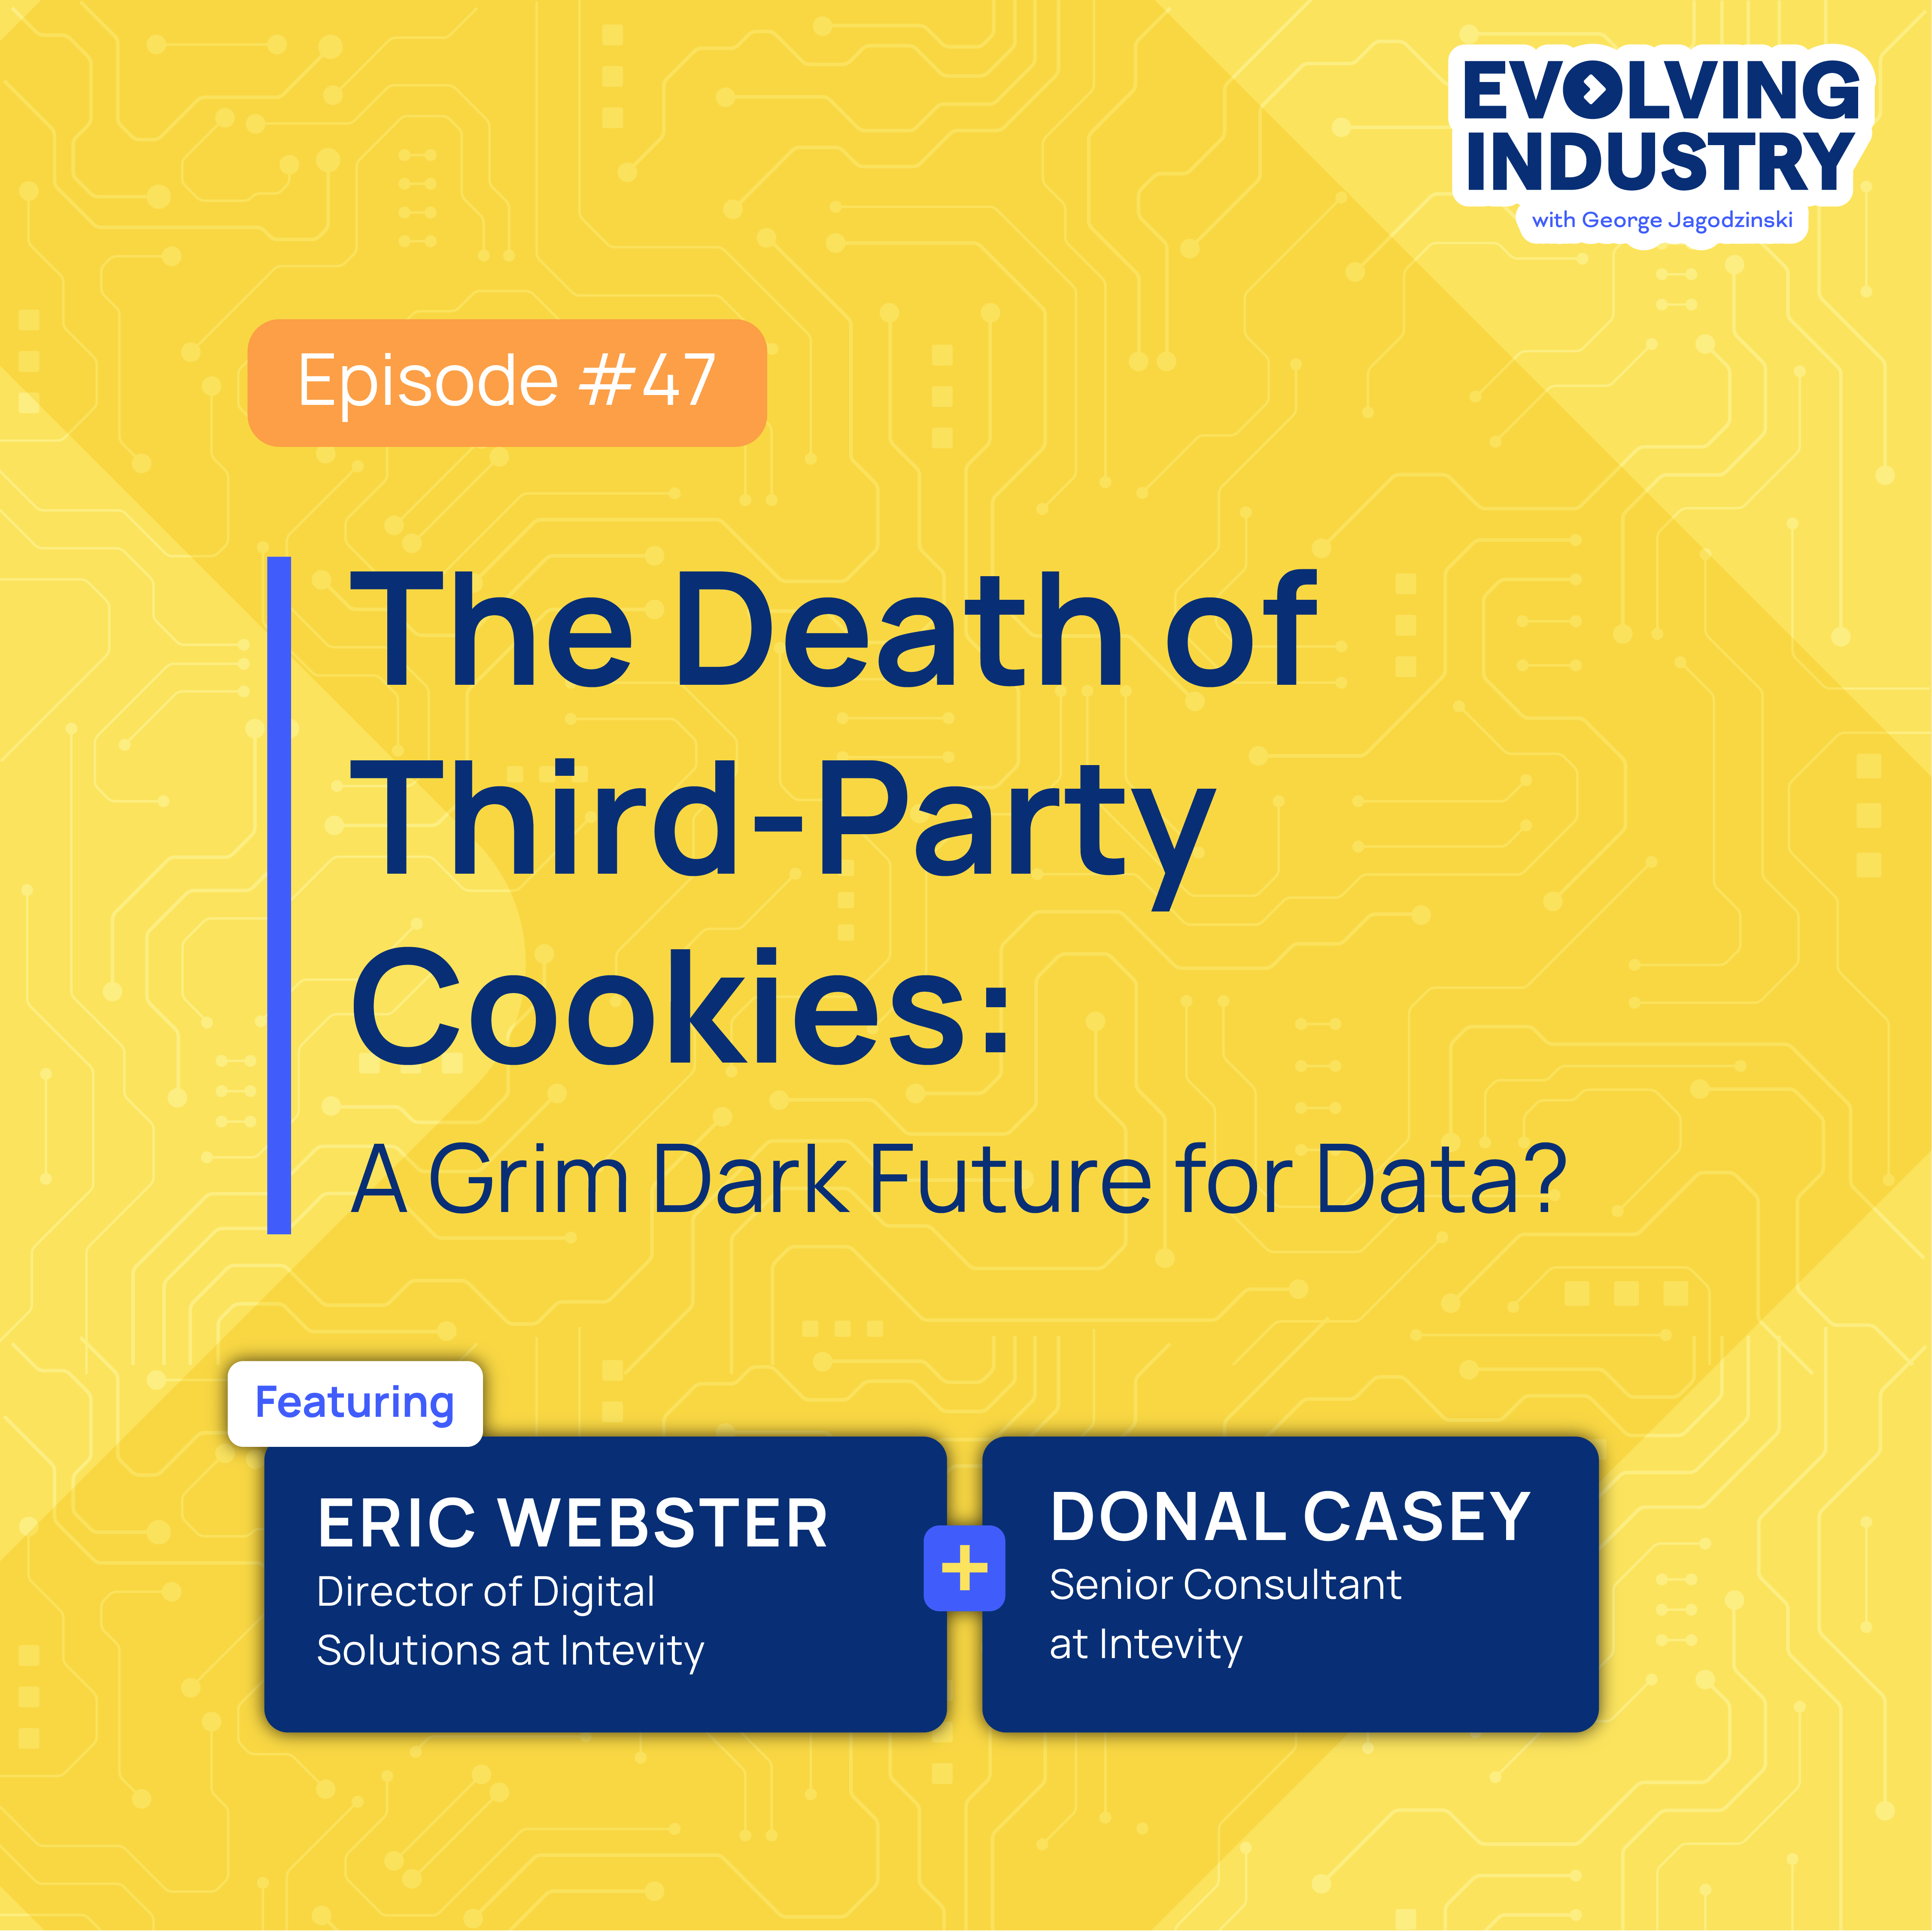 The Death of Third-Party Cookies: A Grim Dark Future for Data?